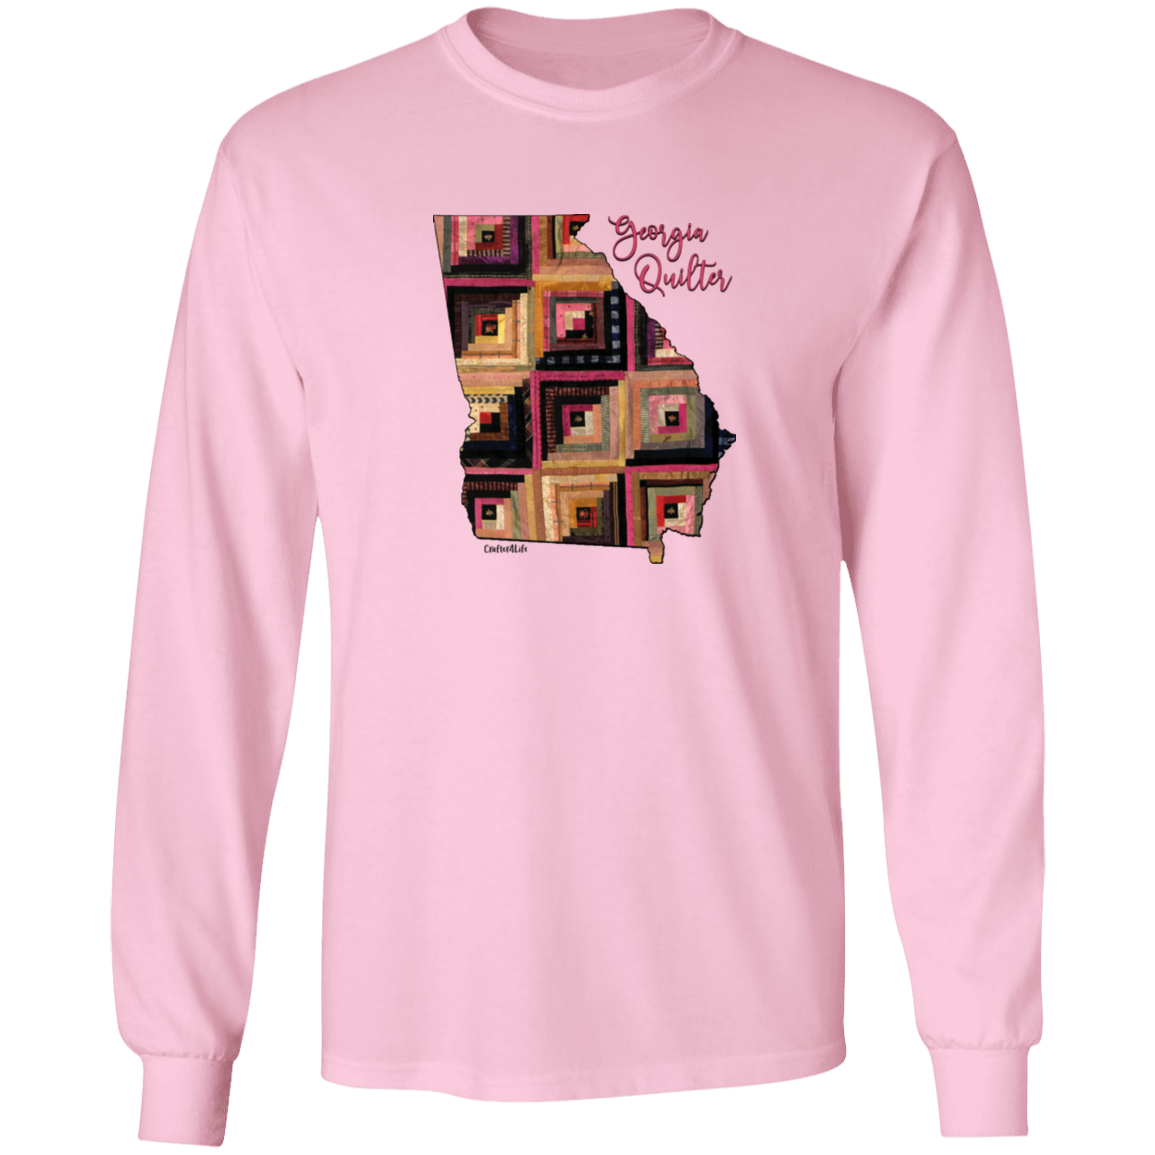 Georgia Quilter Long Sleeve T-Shirt, Gift for Quilting Friends and Family